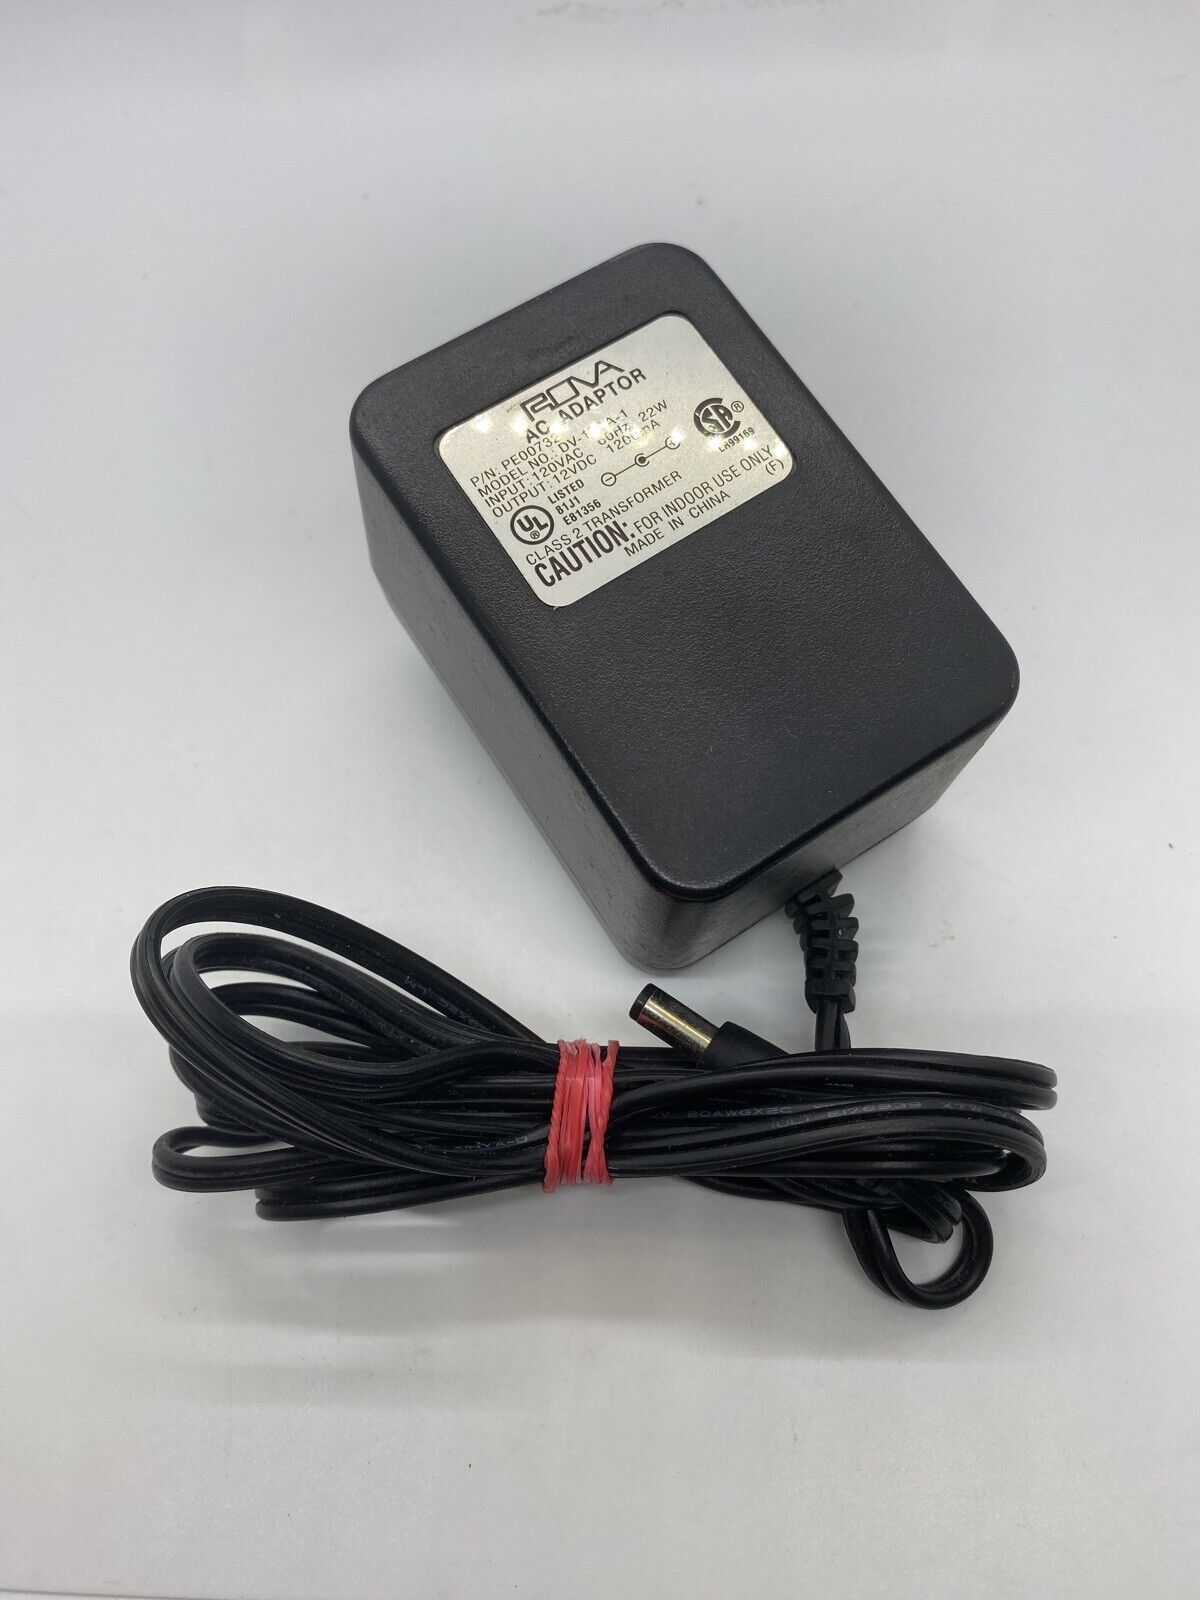 Rova DV-151A-1 AC DC Power Supply Adapter Charger Output 12V 1200mA PE00732 Connection Split/Duplication 1:2 Type Adap